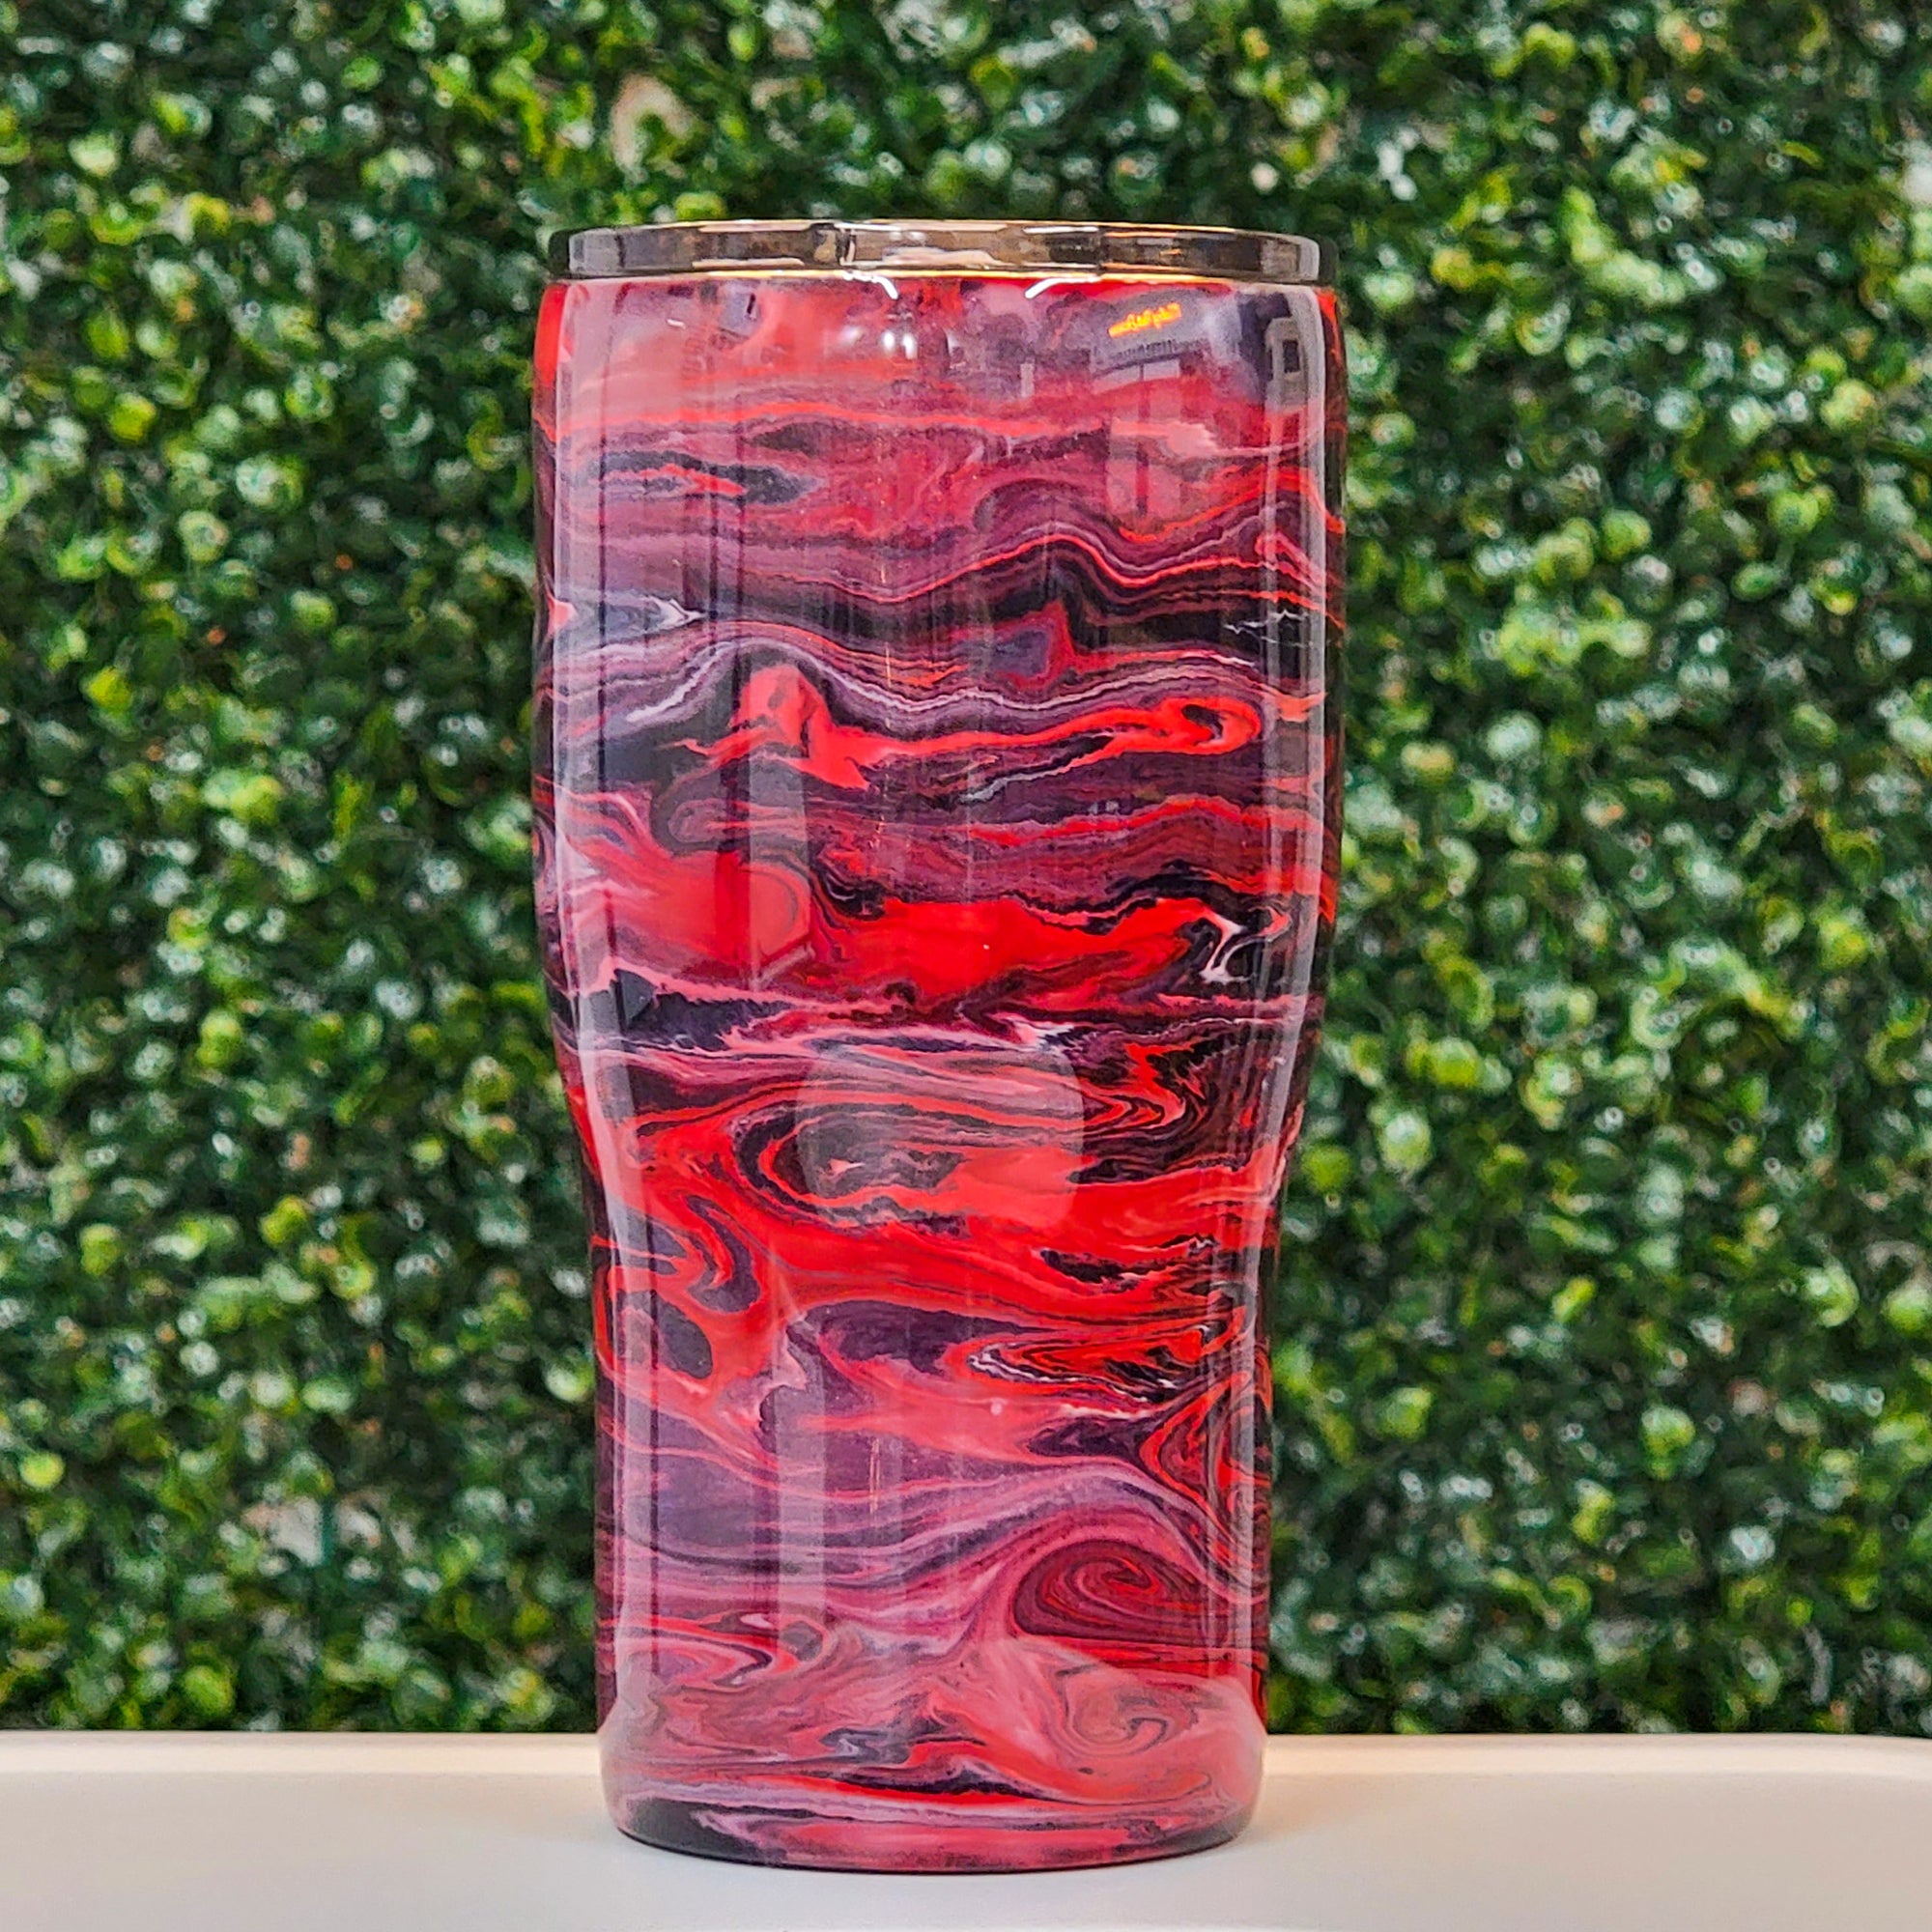 20oz Modern Curve Tumbler - Stainless Steel